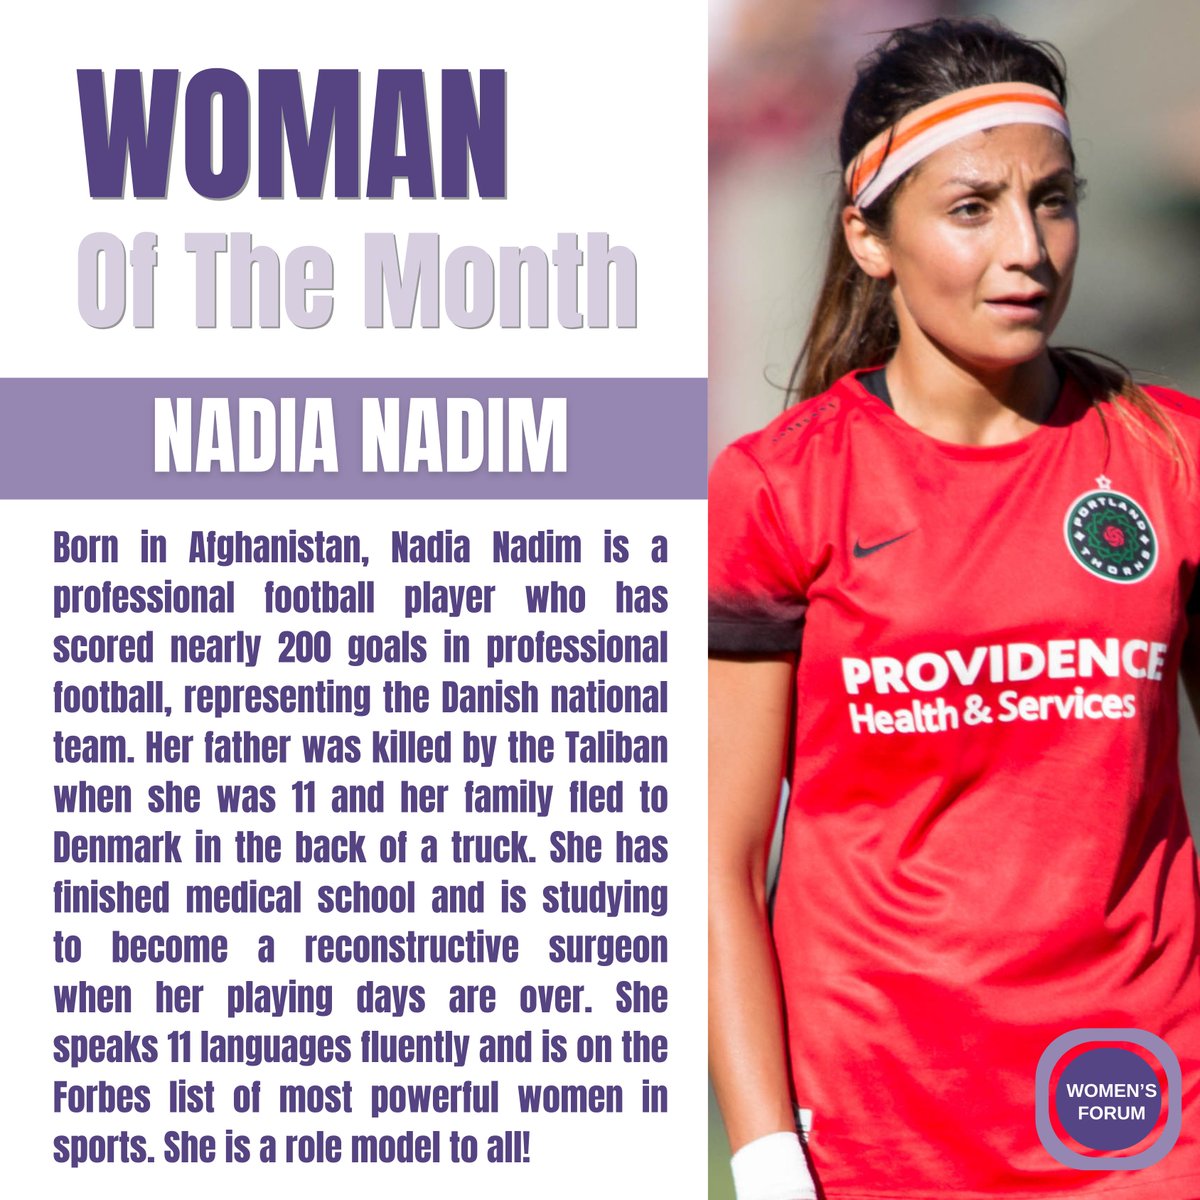 🌟 Exciting News! Introducing our brand-new series: #WomanOfTheMonth! Each month, we'll spotlight a remarkable woman who's breaking barriers & inspiring us all. We're kicking things off with the incredible #NadiaNadim, a role model to women and girls everywhere! 💫